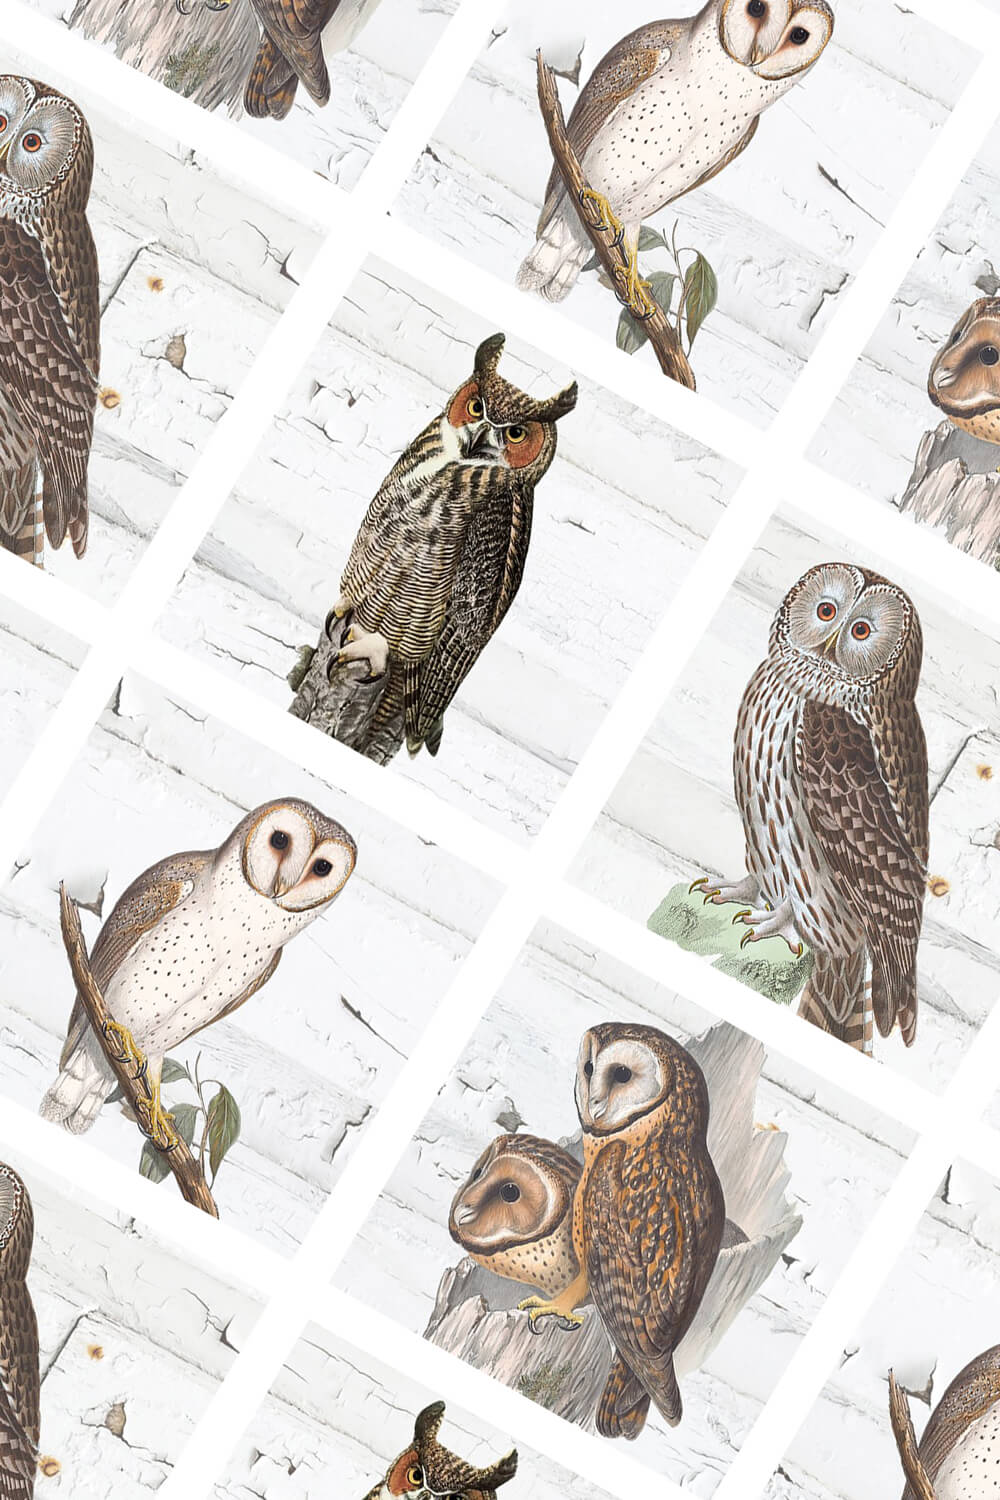 Diagonal image with painted owls.